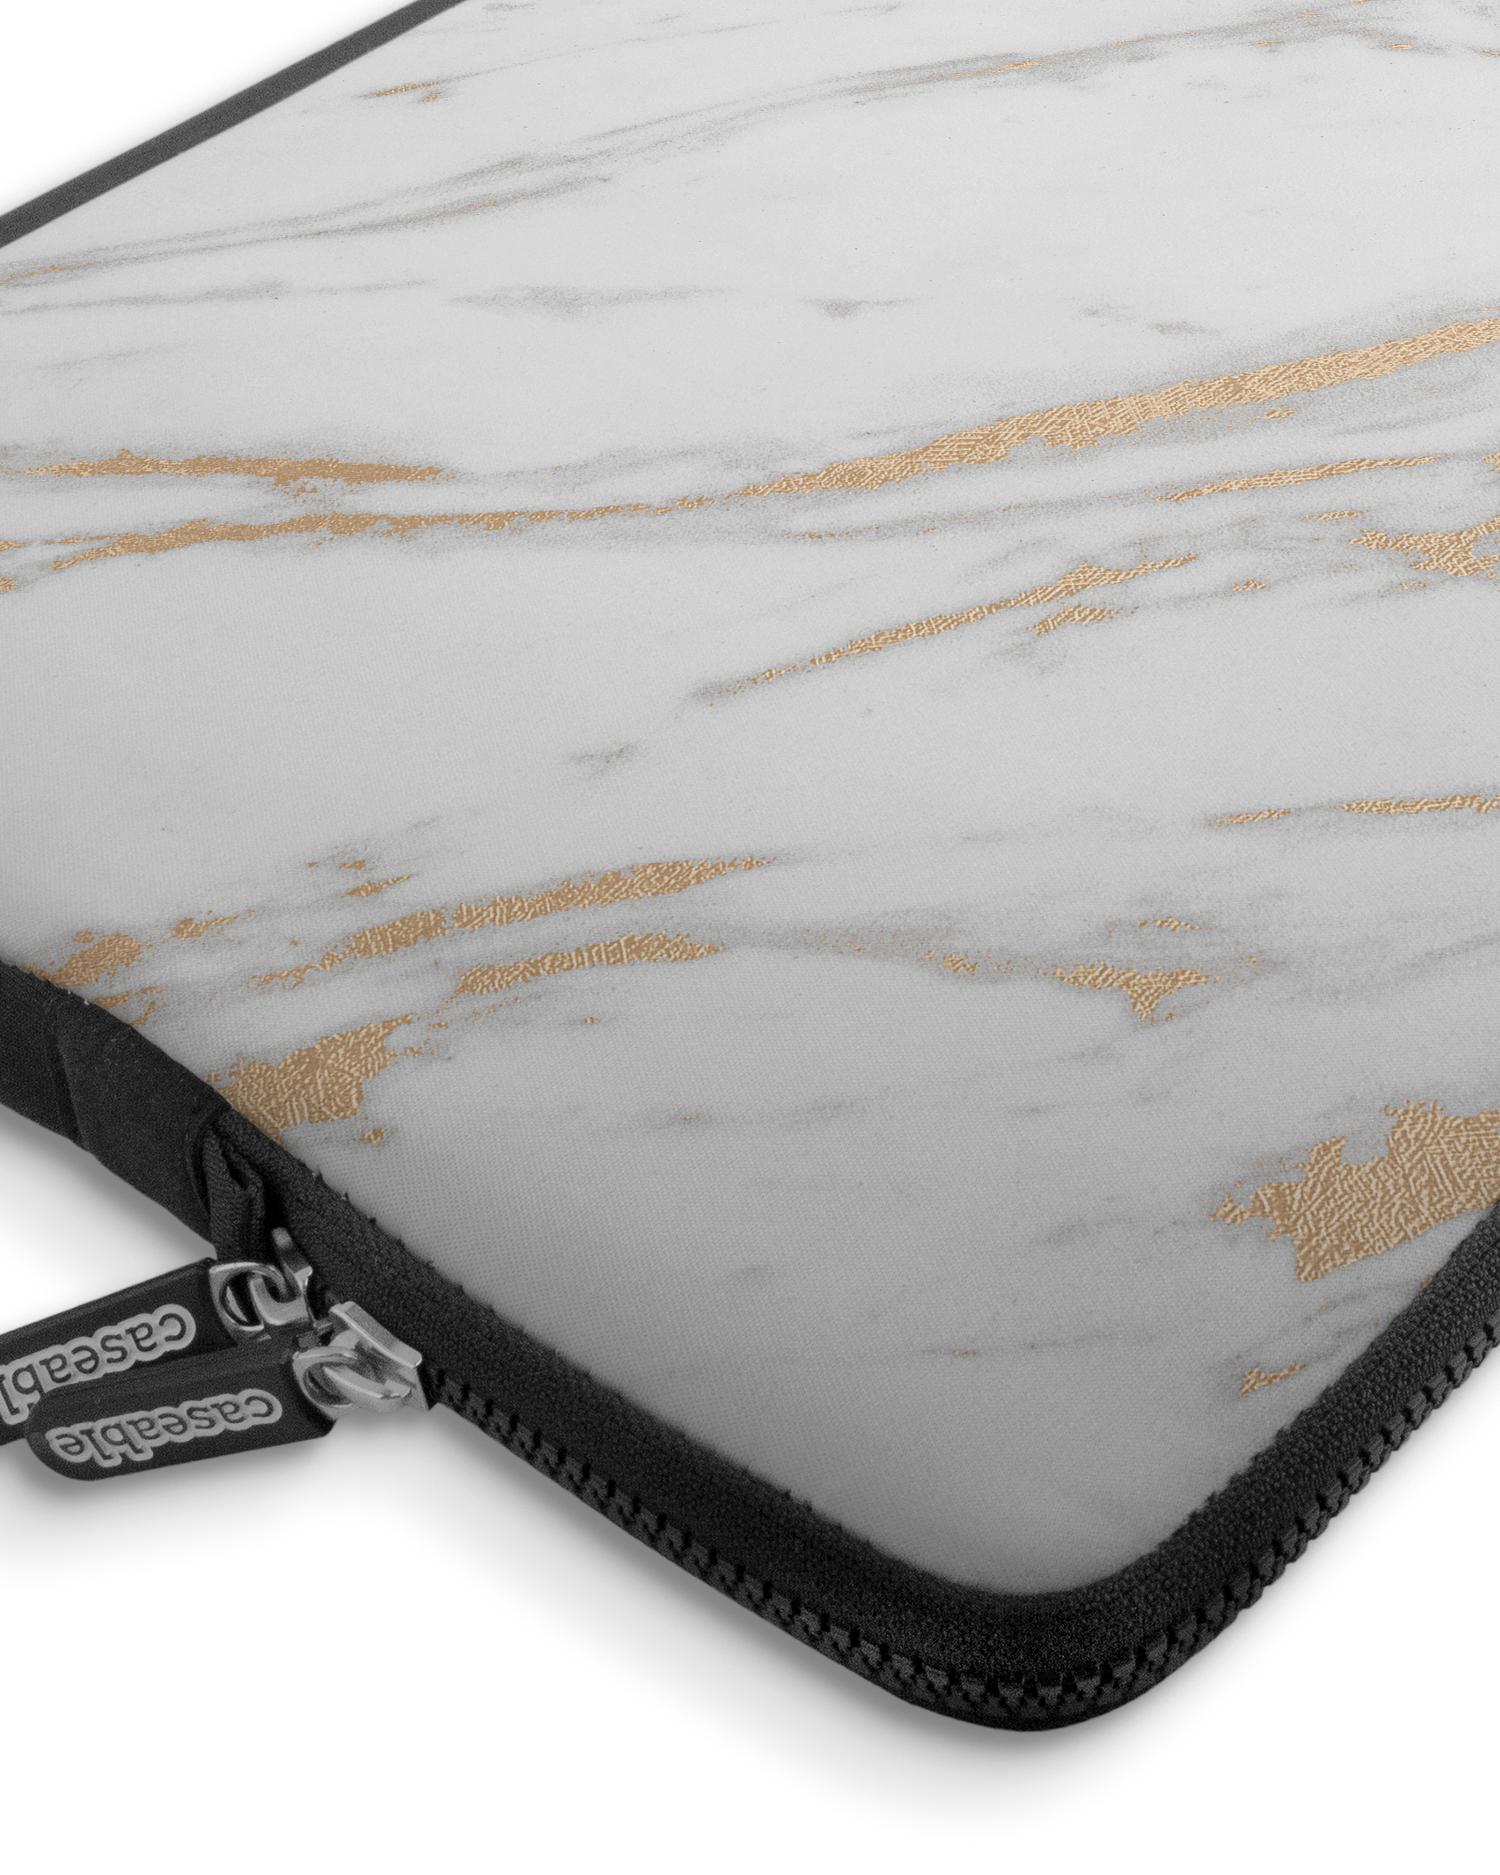 Gold Marble Elegance Premium Laptop Bag 17 inch with device inside